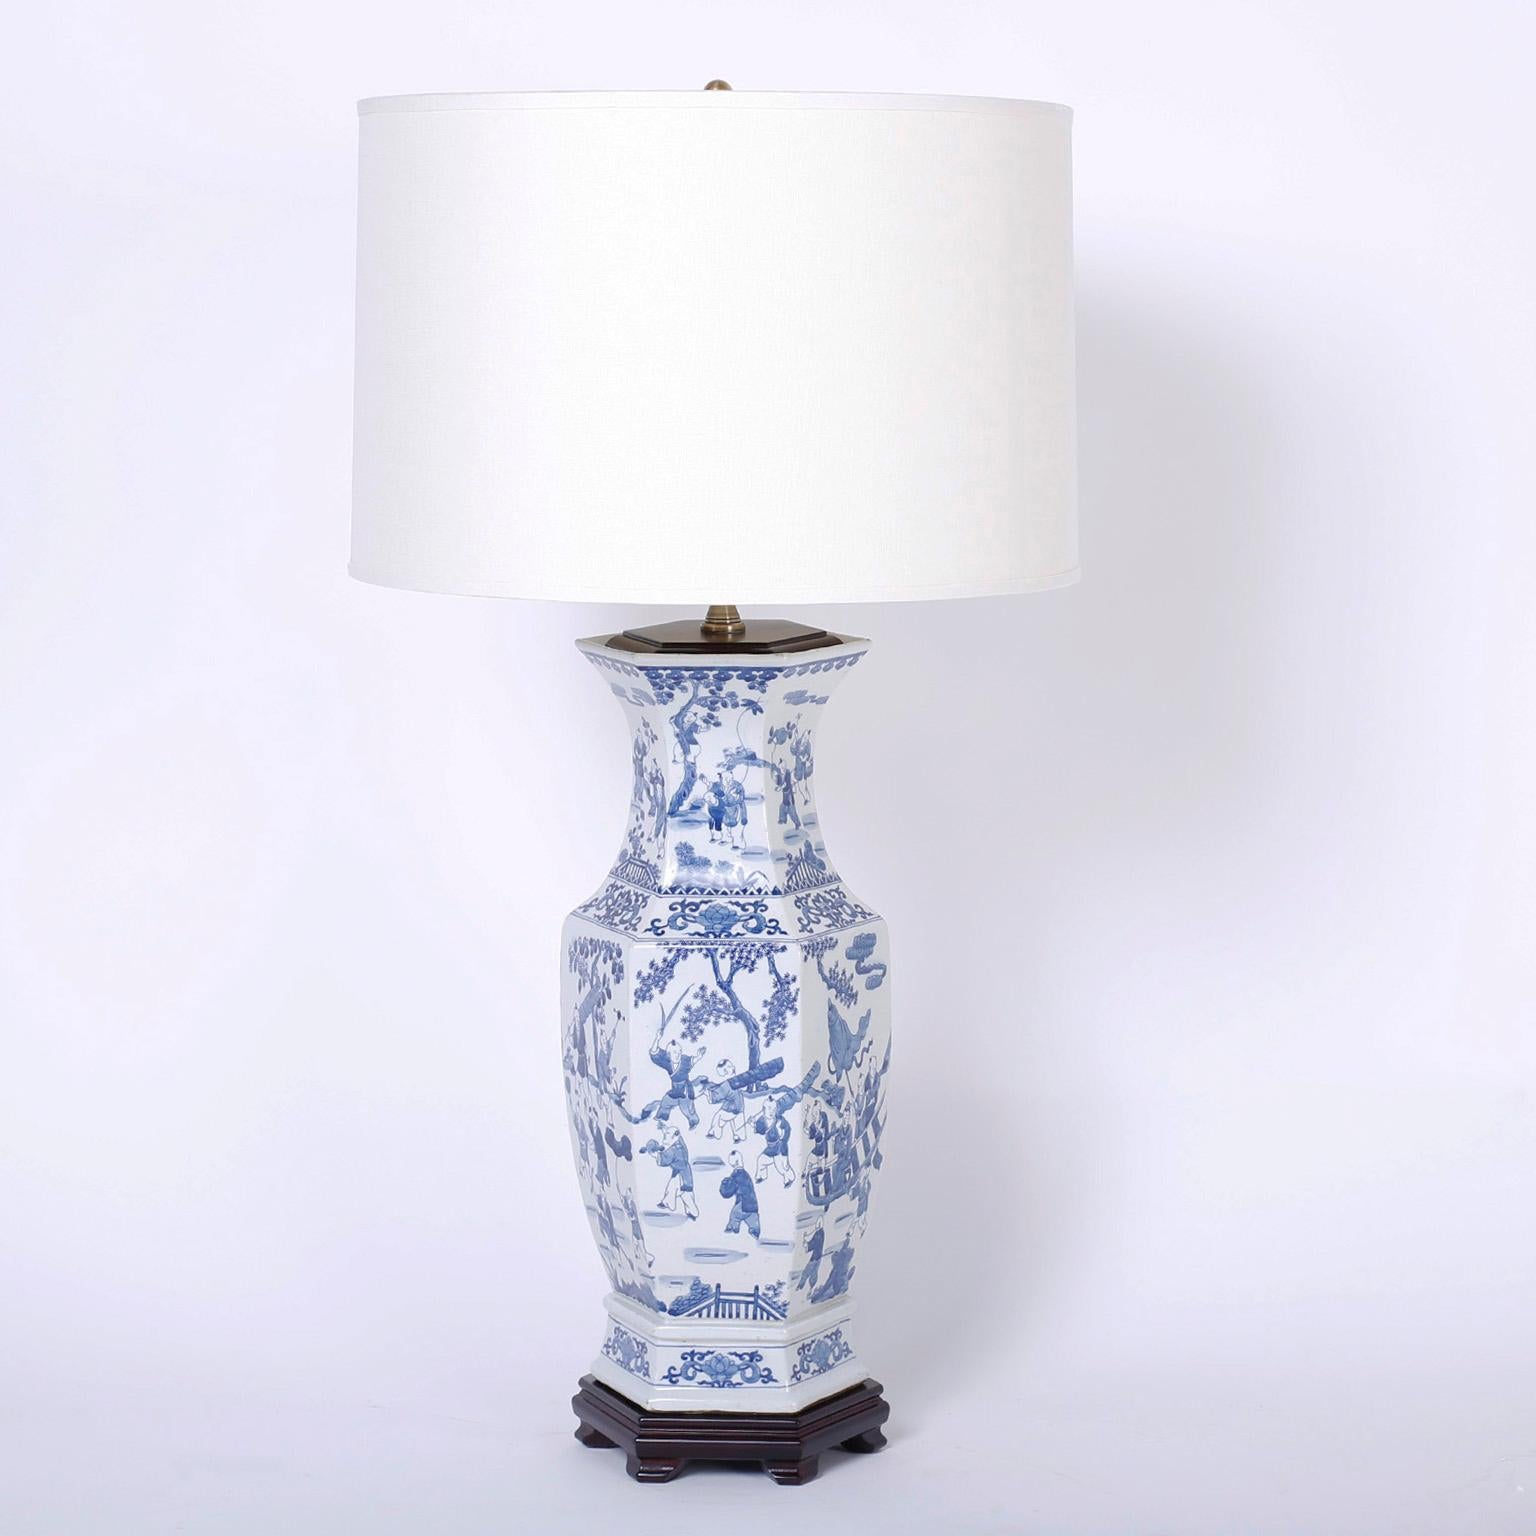 Pair of classic blue and white Chinese porcelain table lamps with a hexagon form hand decorated on all six sides with symbolic chinoiserie scenes and with a polished mahogany cap and base.